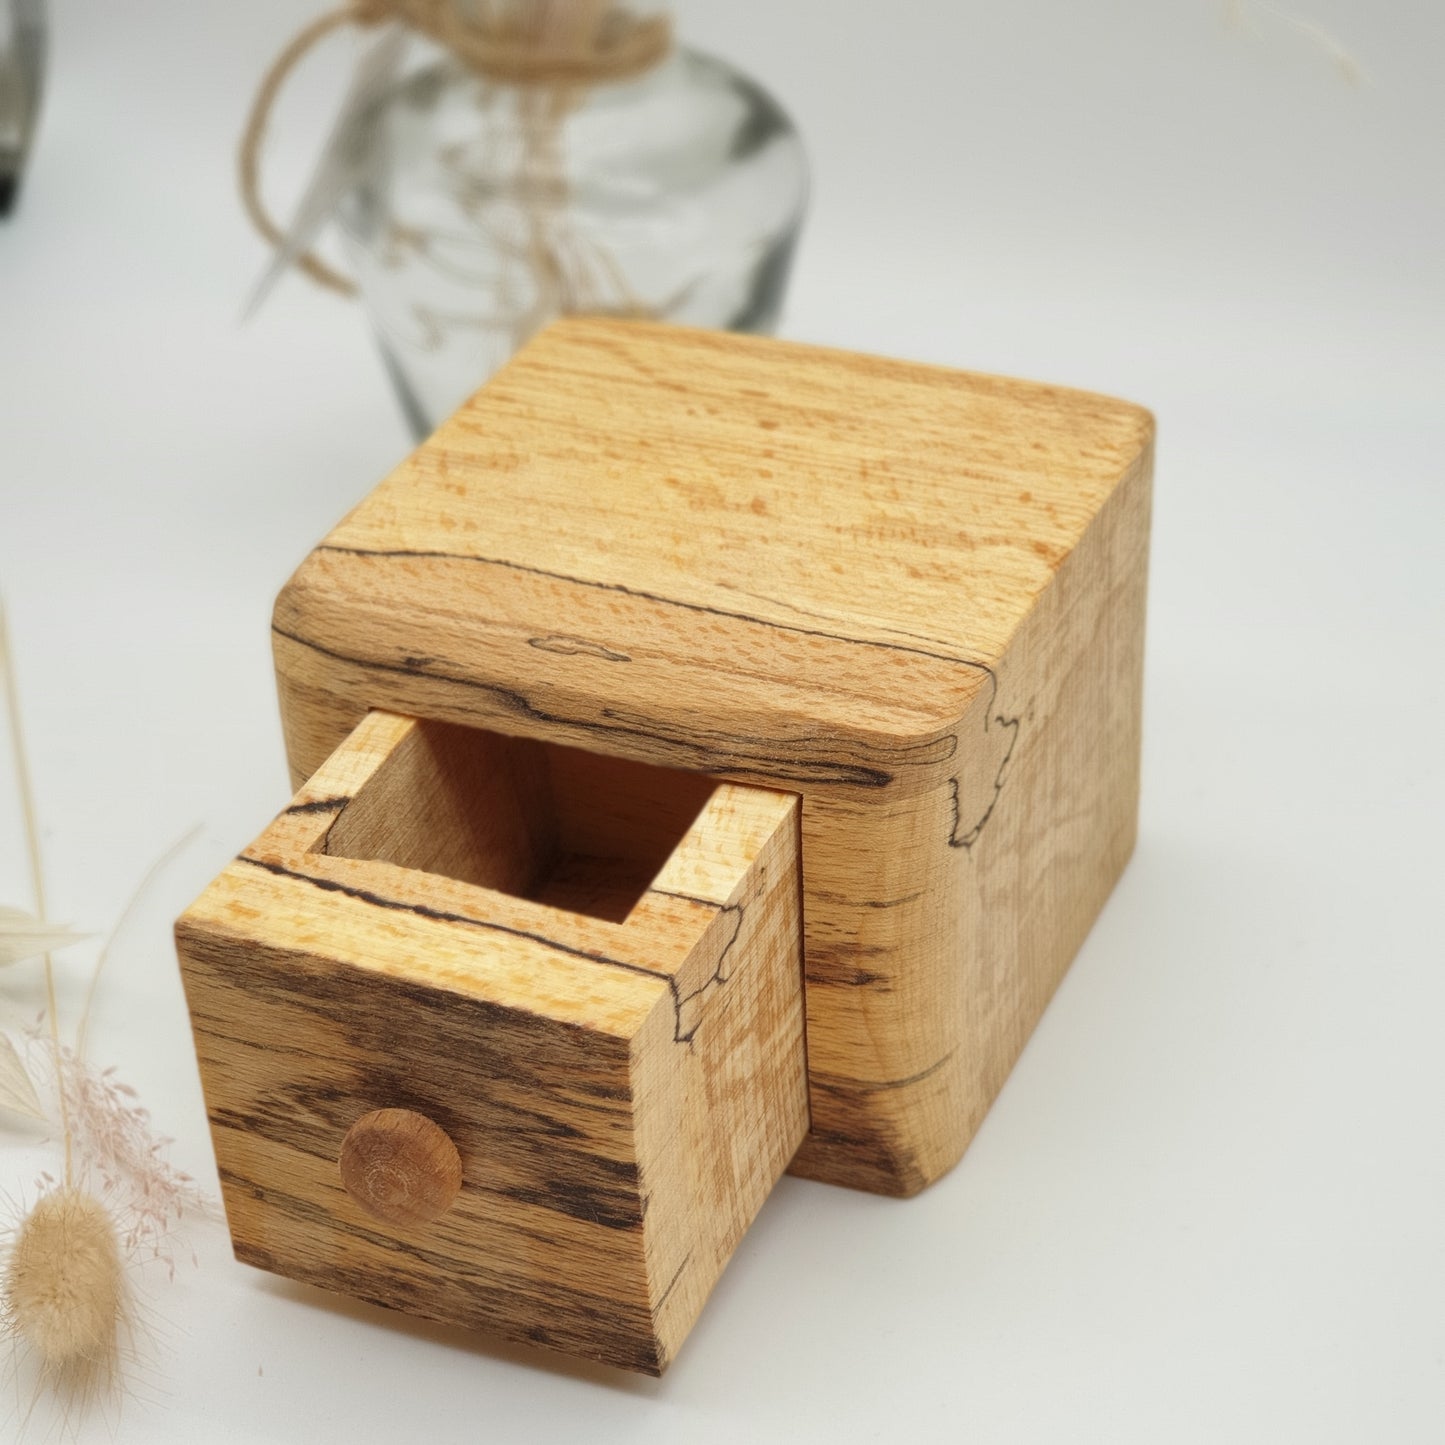 Natural edge wooden box - Spalted Beech